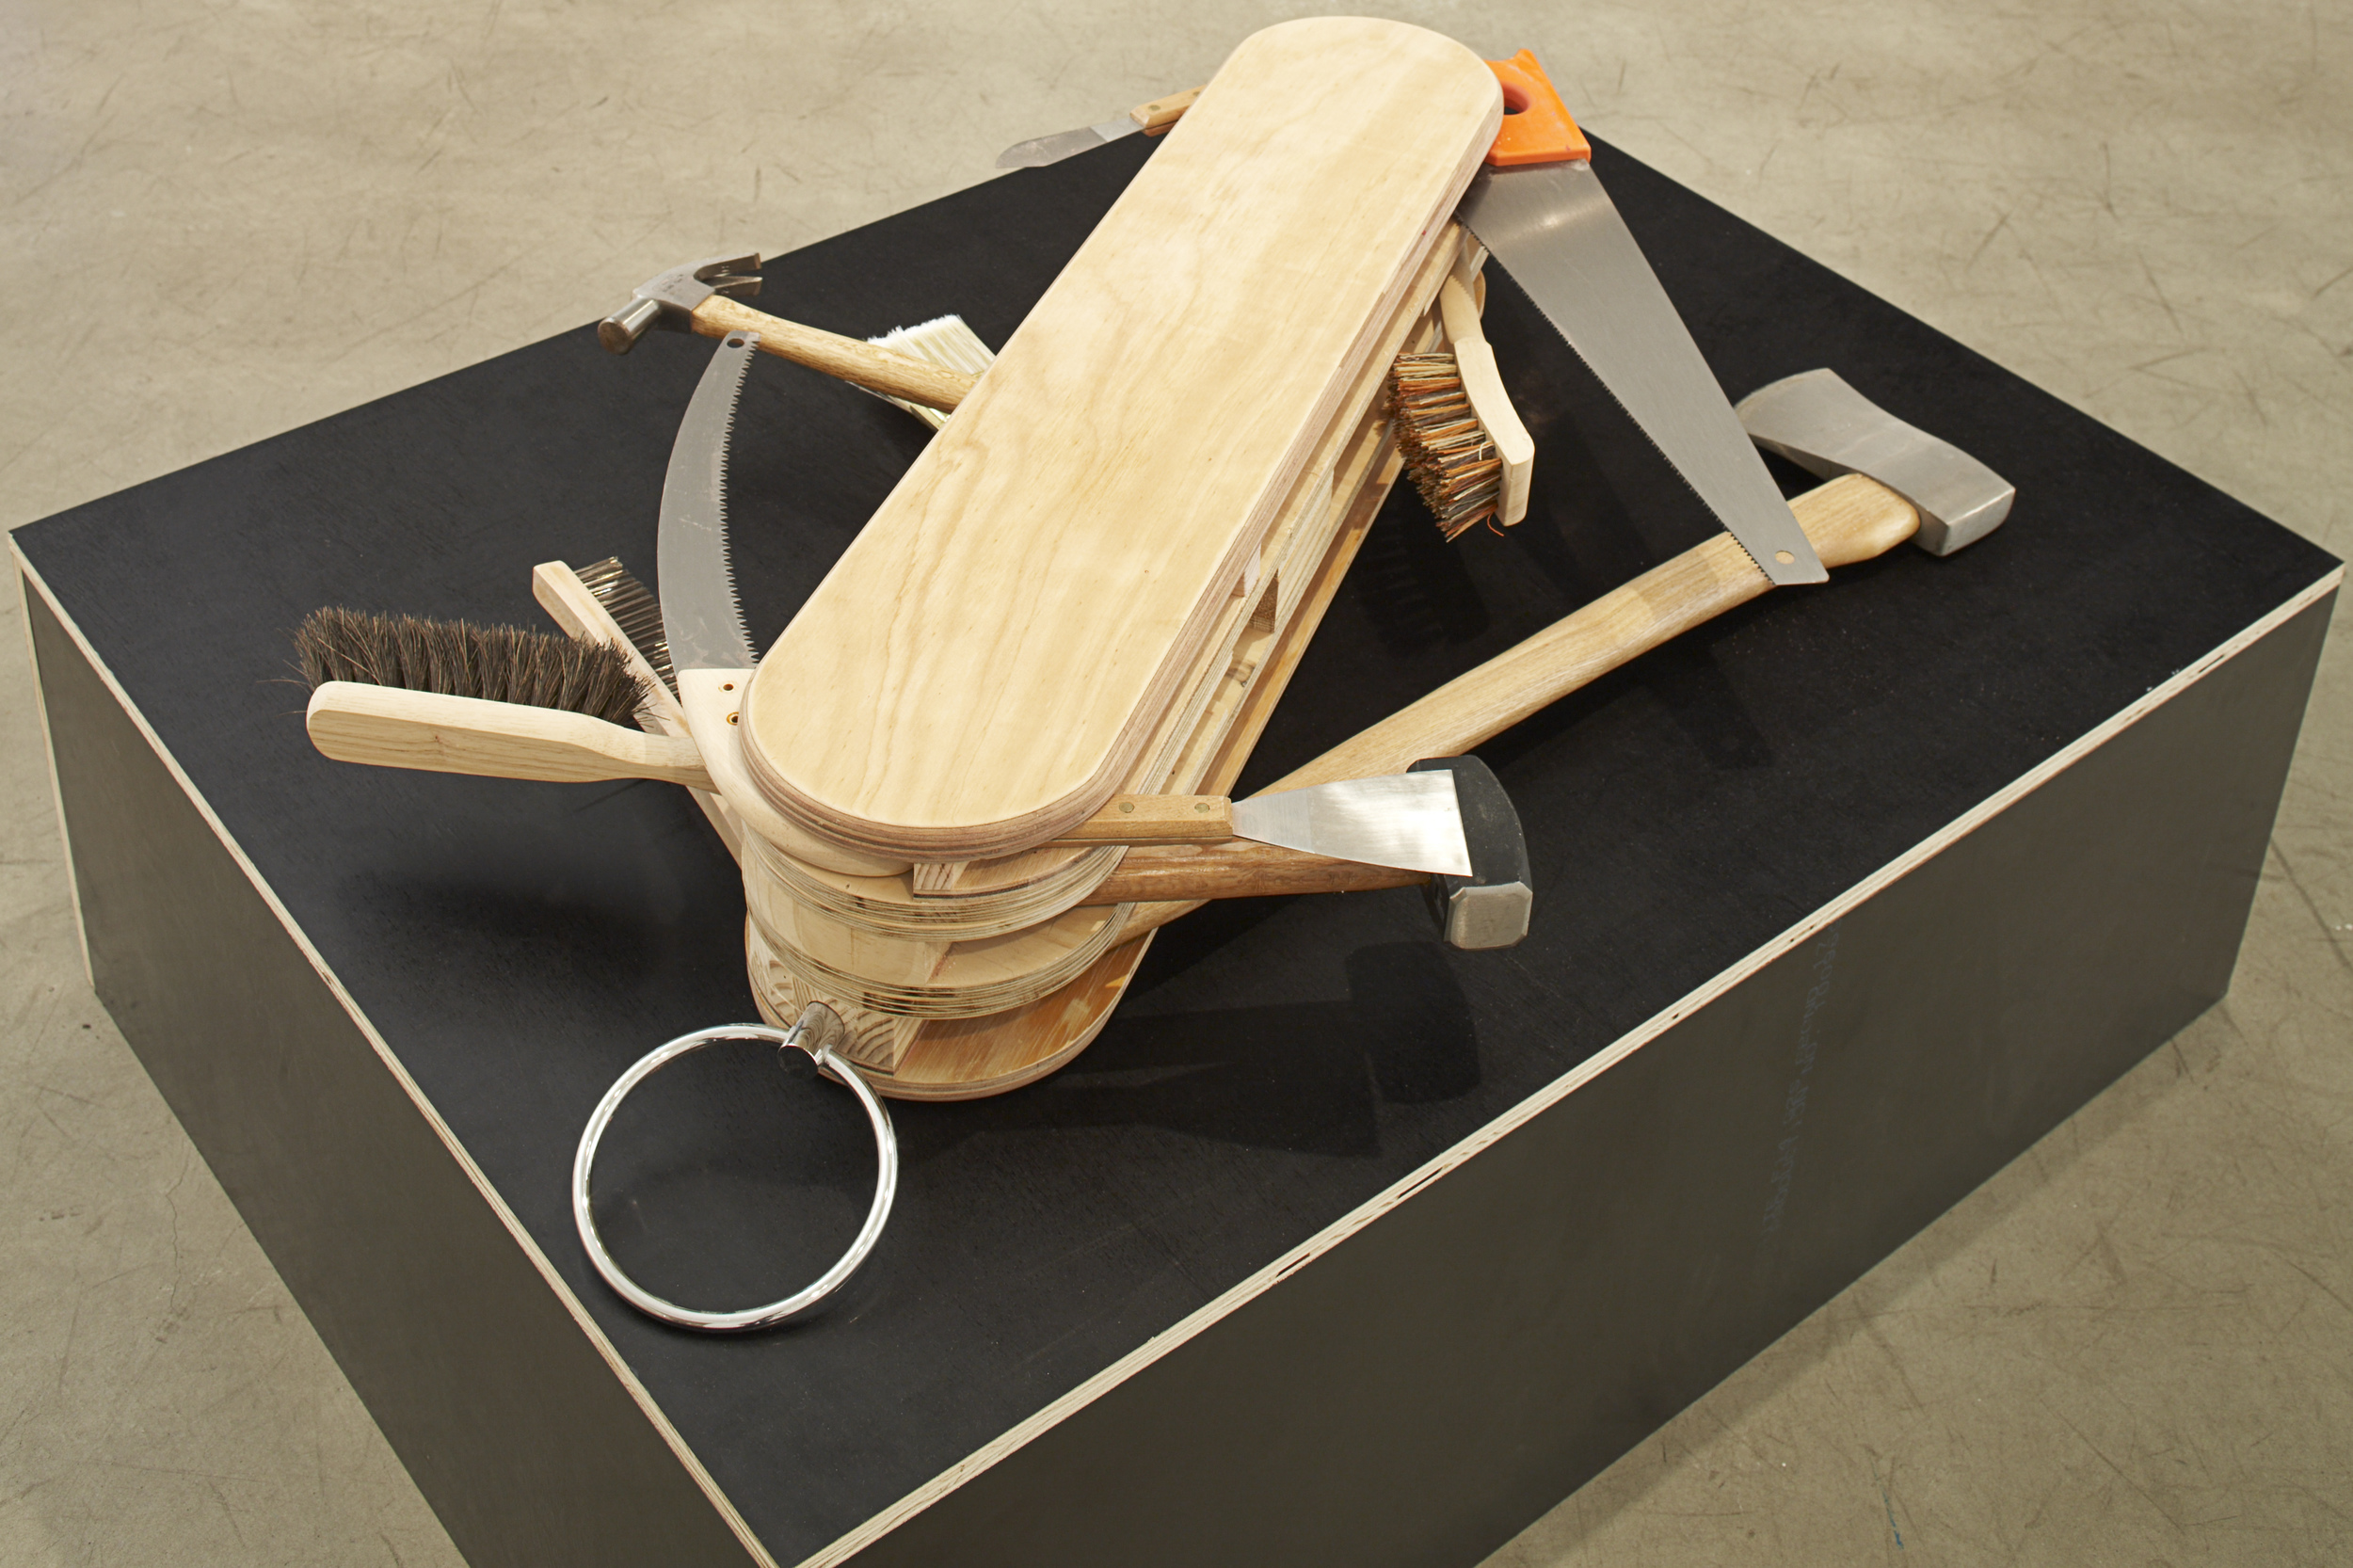  You Tool, 2008 Mixed Media 18.5 20 x 105 cm closed Dimensions Variable 